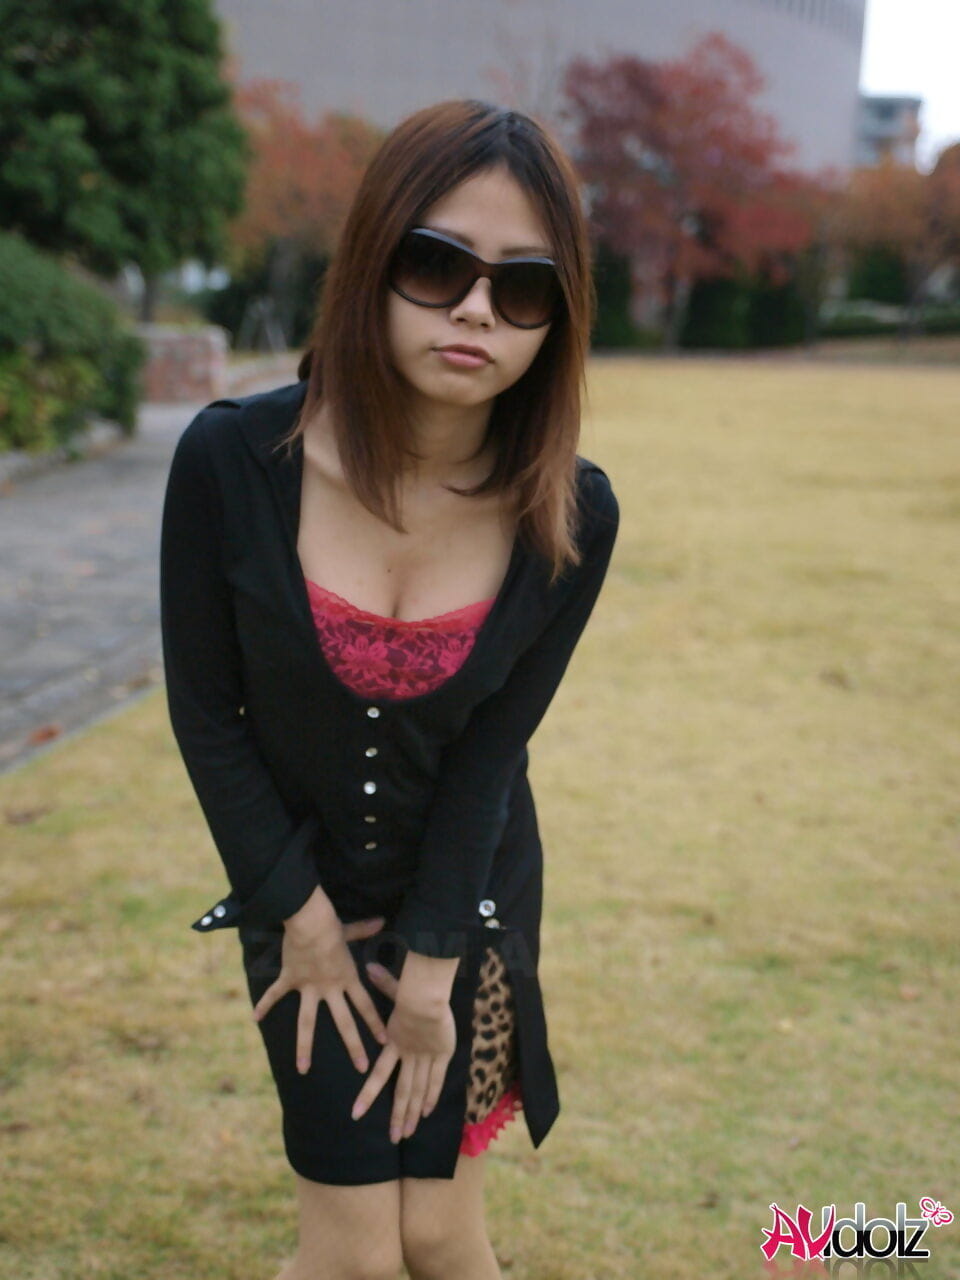 Fully clothed Japanese girl lifts up sunglasses to show her pretty face page 1